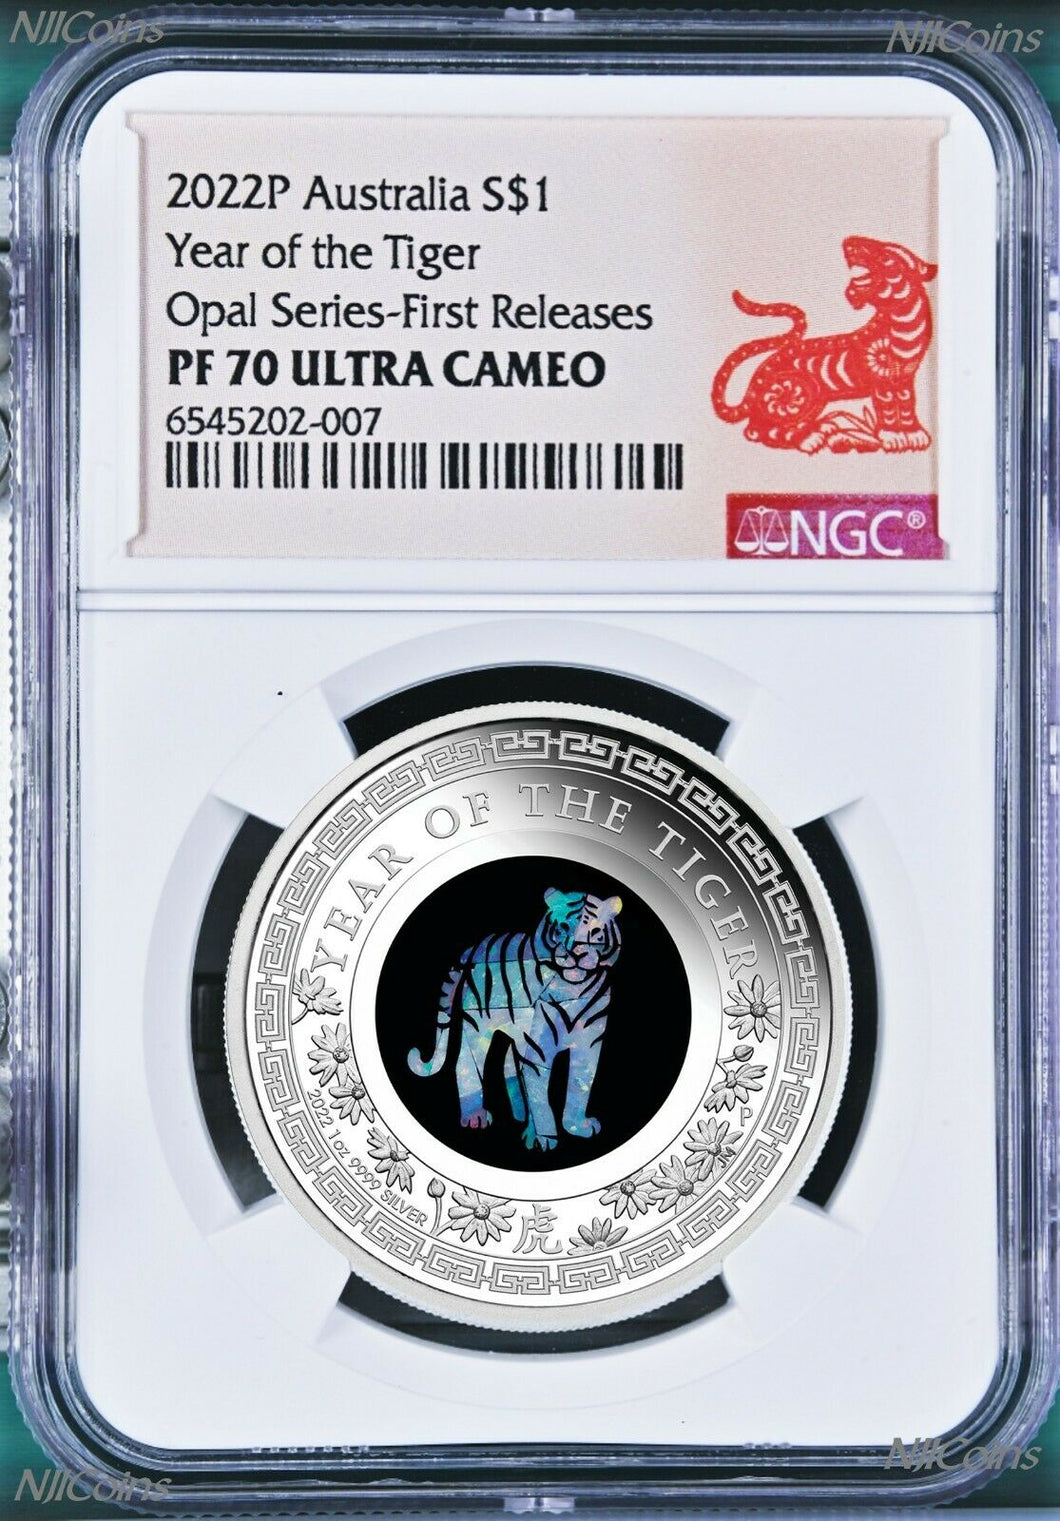 2022 Australia OPAL LUNAR Year of the Tiger 1 oz Silver Proof Coin NGC PF70 FR